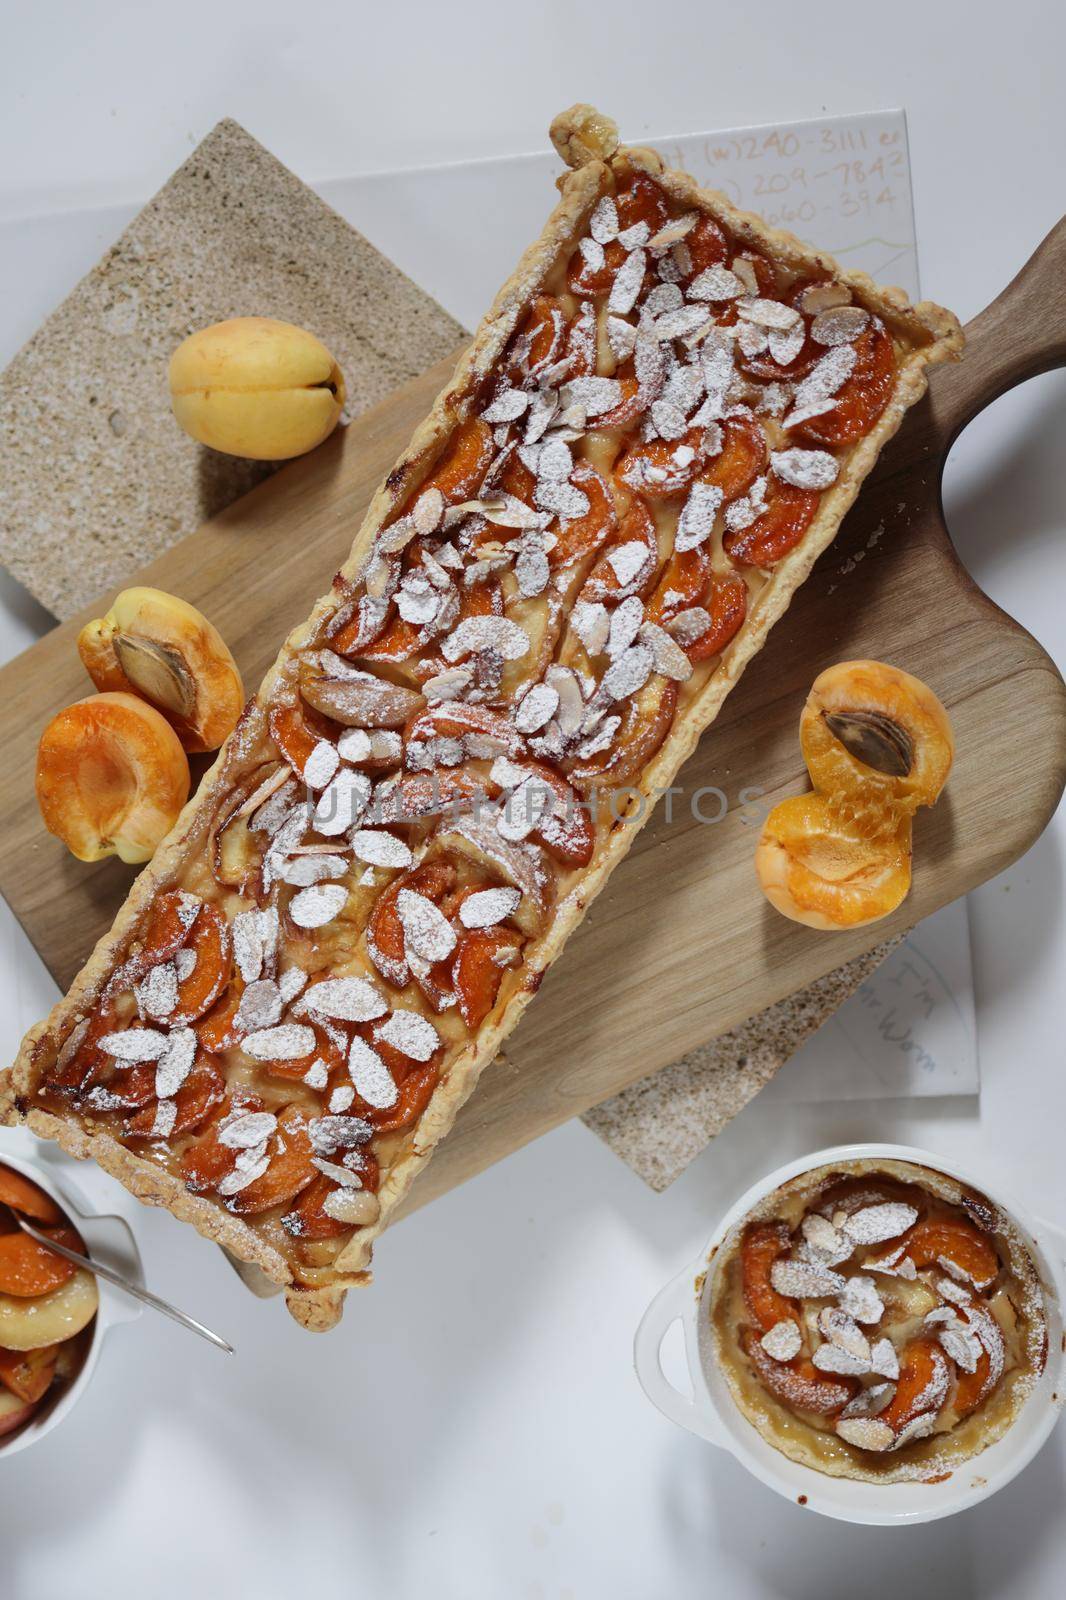 Homemade rectangular shortbread pie with apricots and peaches. Vertical image by Proxima13